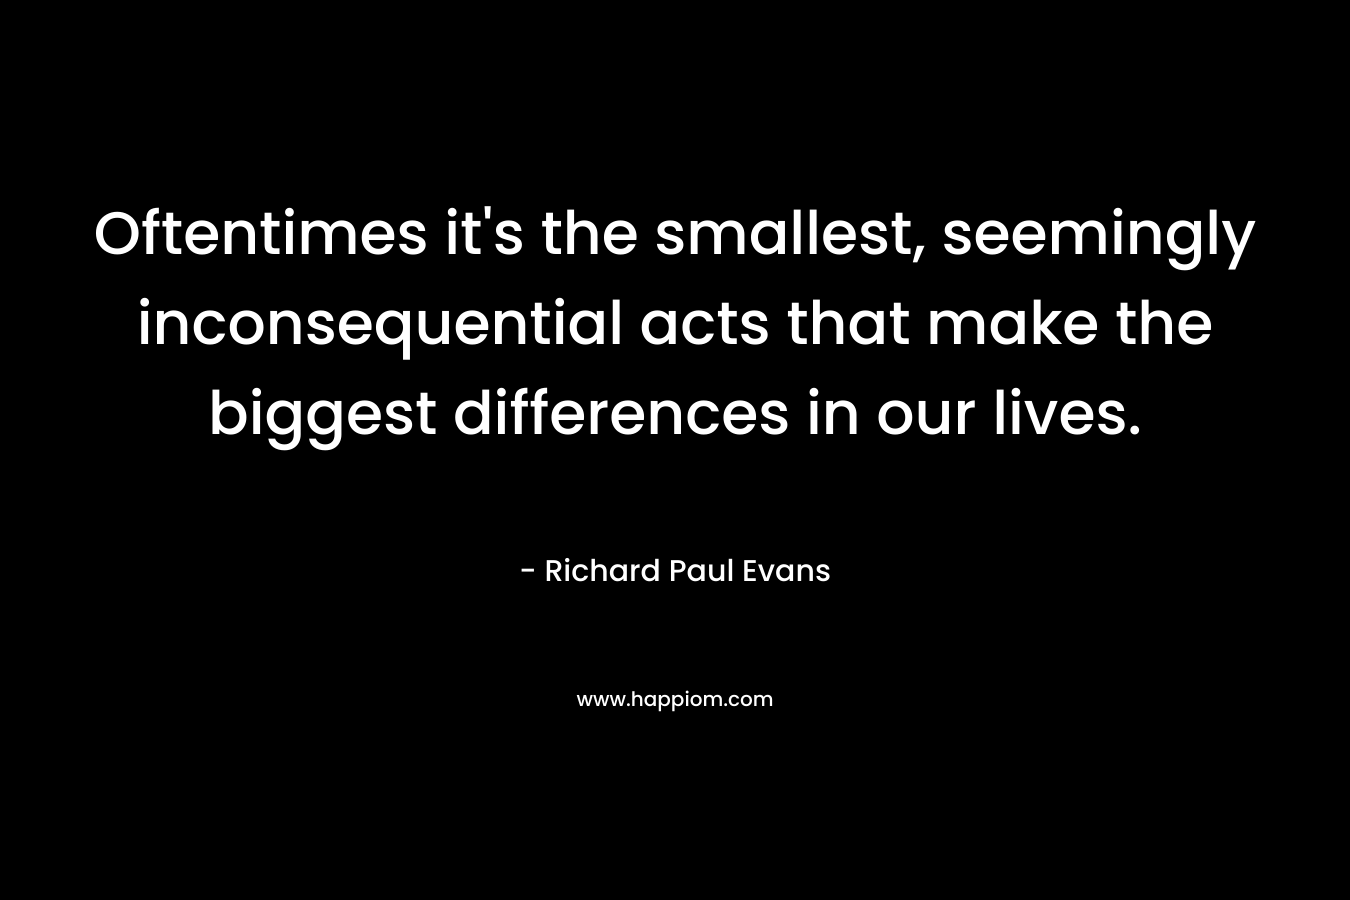 Oftentimes it’s the smallest, seemingly inconsequential acts that make the biggest differences in our lives. – Richard Paul Evans